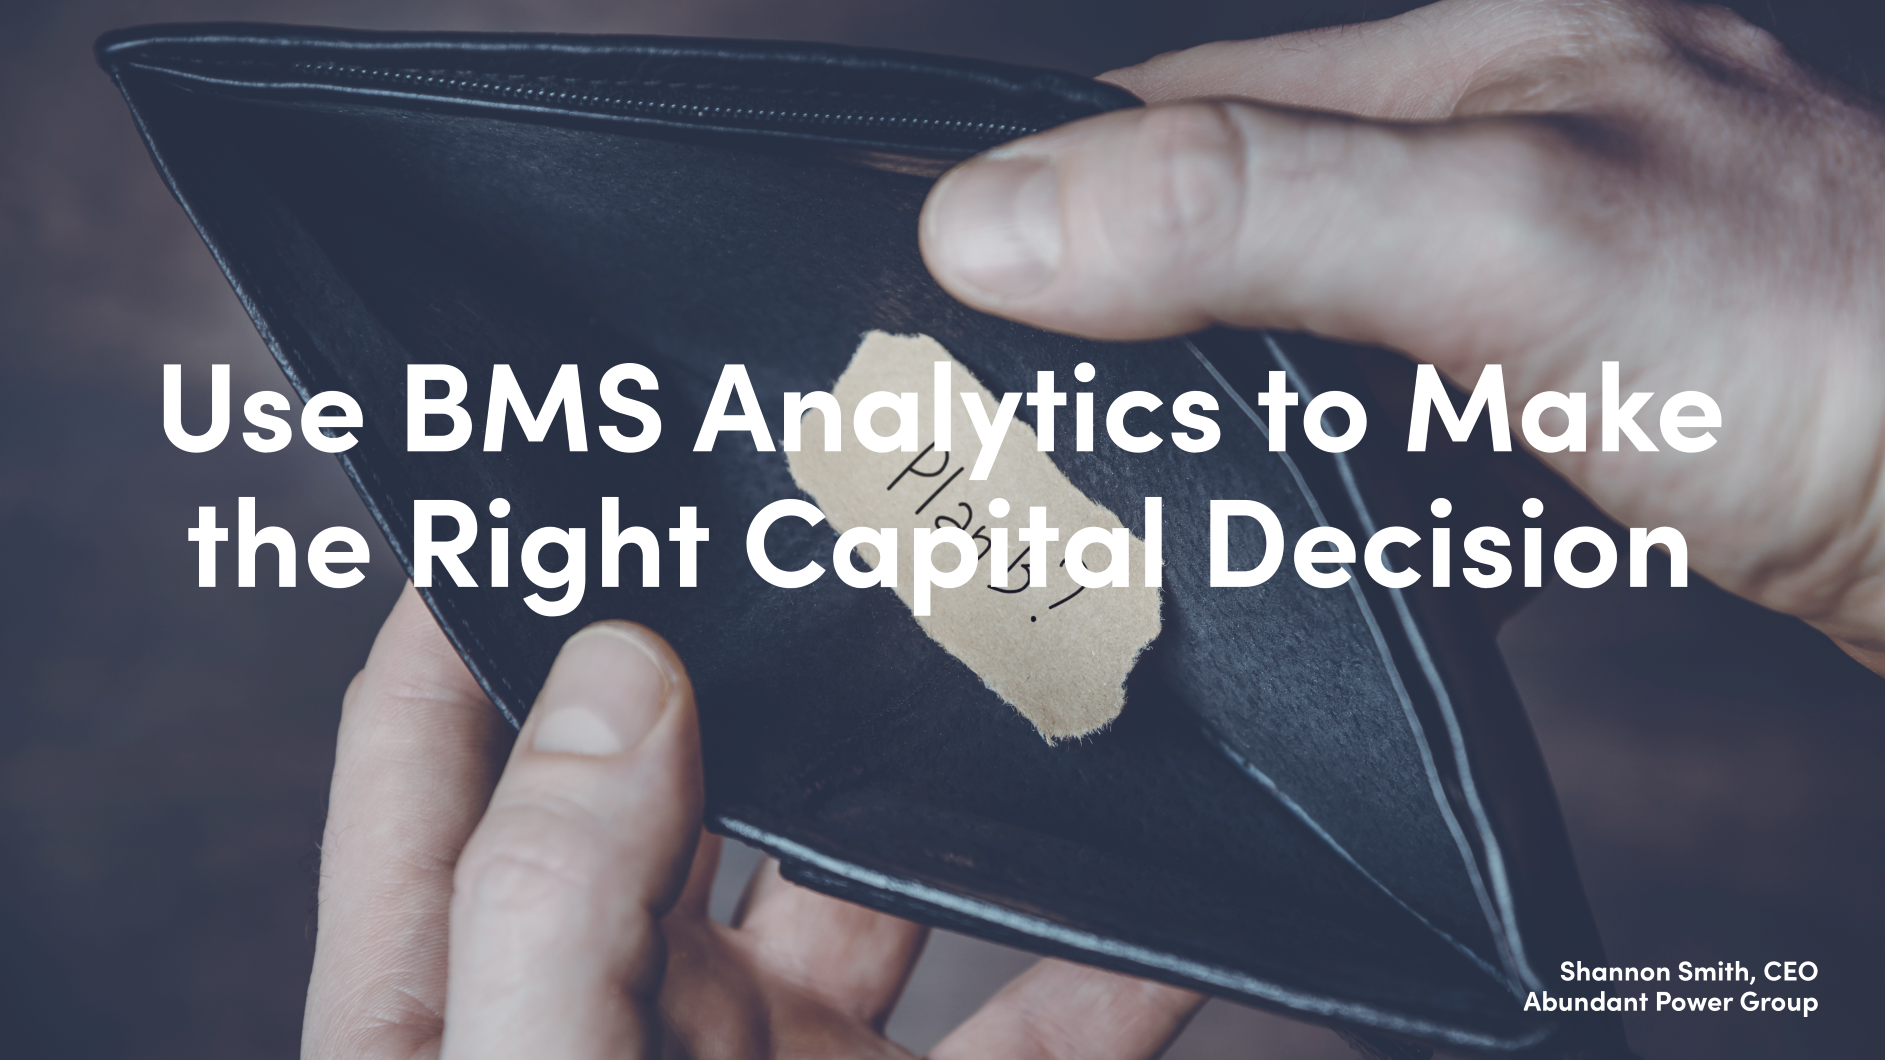 Use Data to Make the Right Capital Decisions